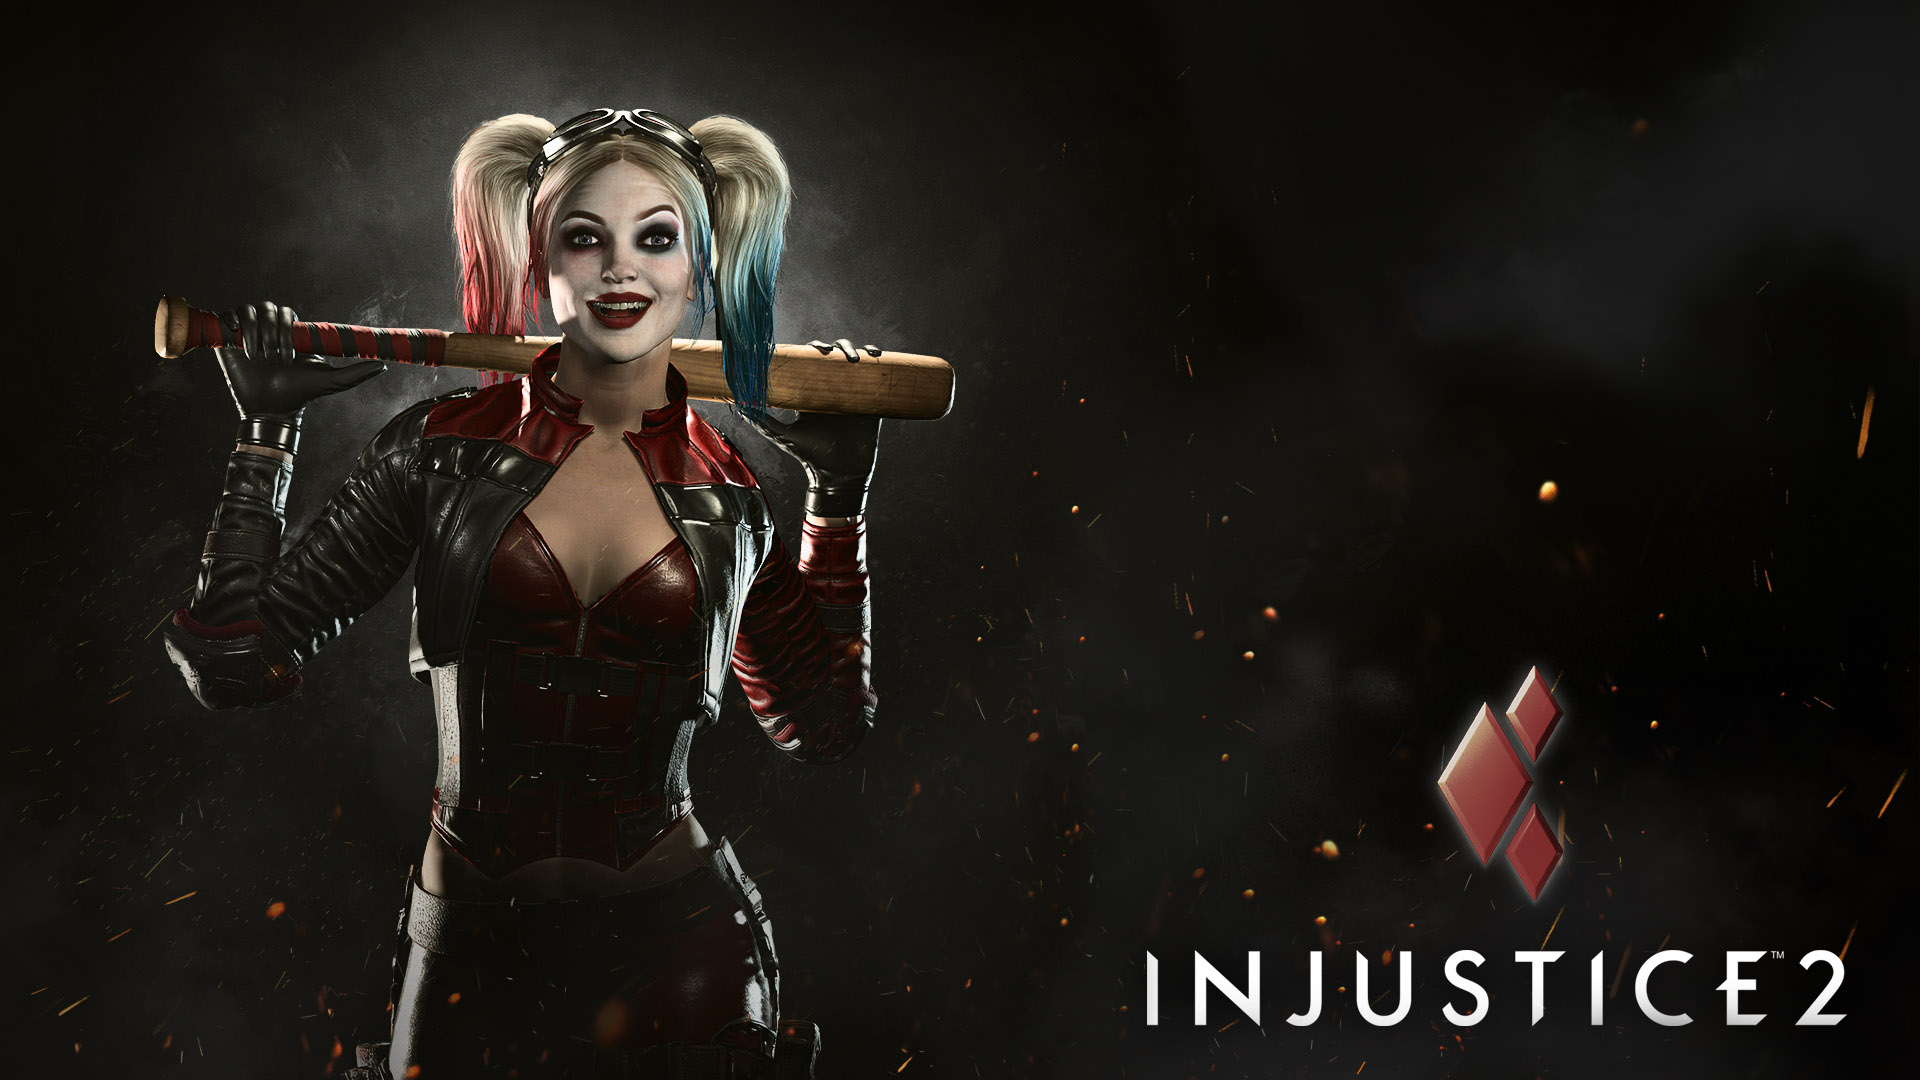 Harley Quinn in Injustice 2 Wallpapers | HD Wallpapers